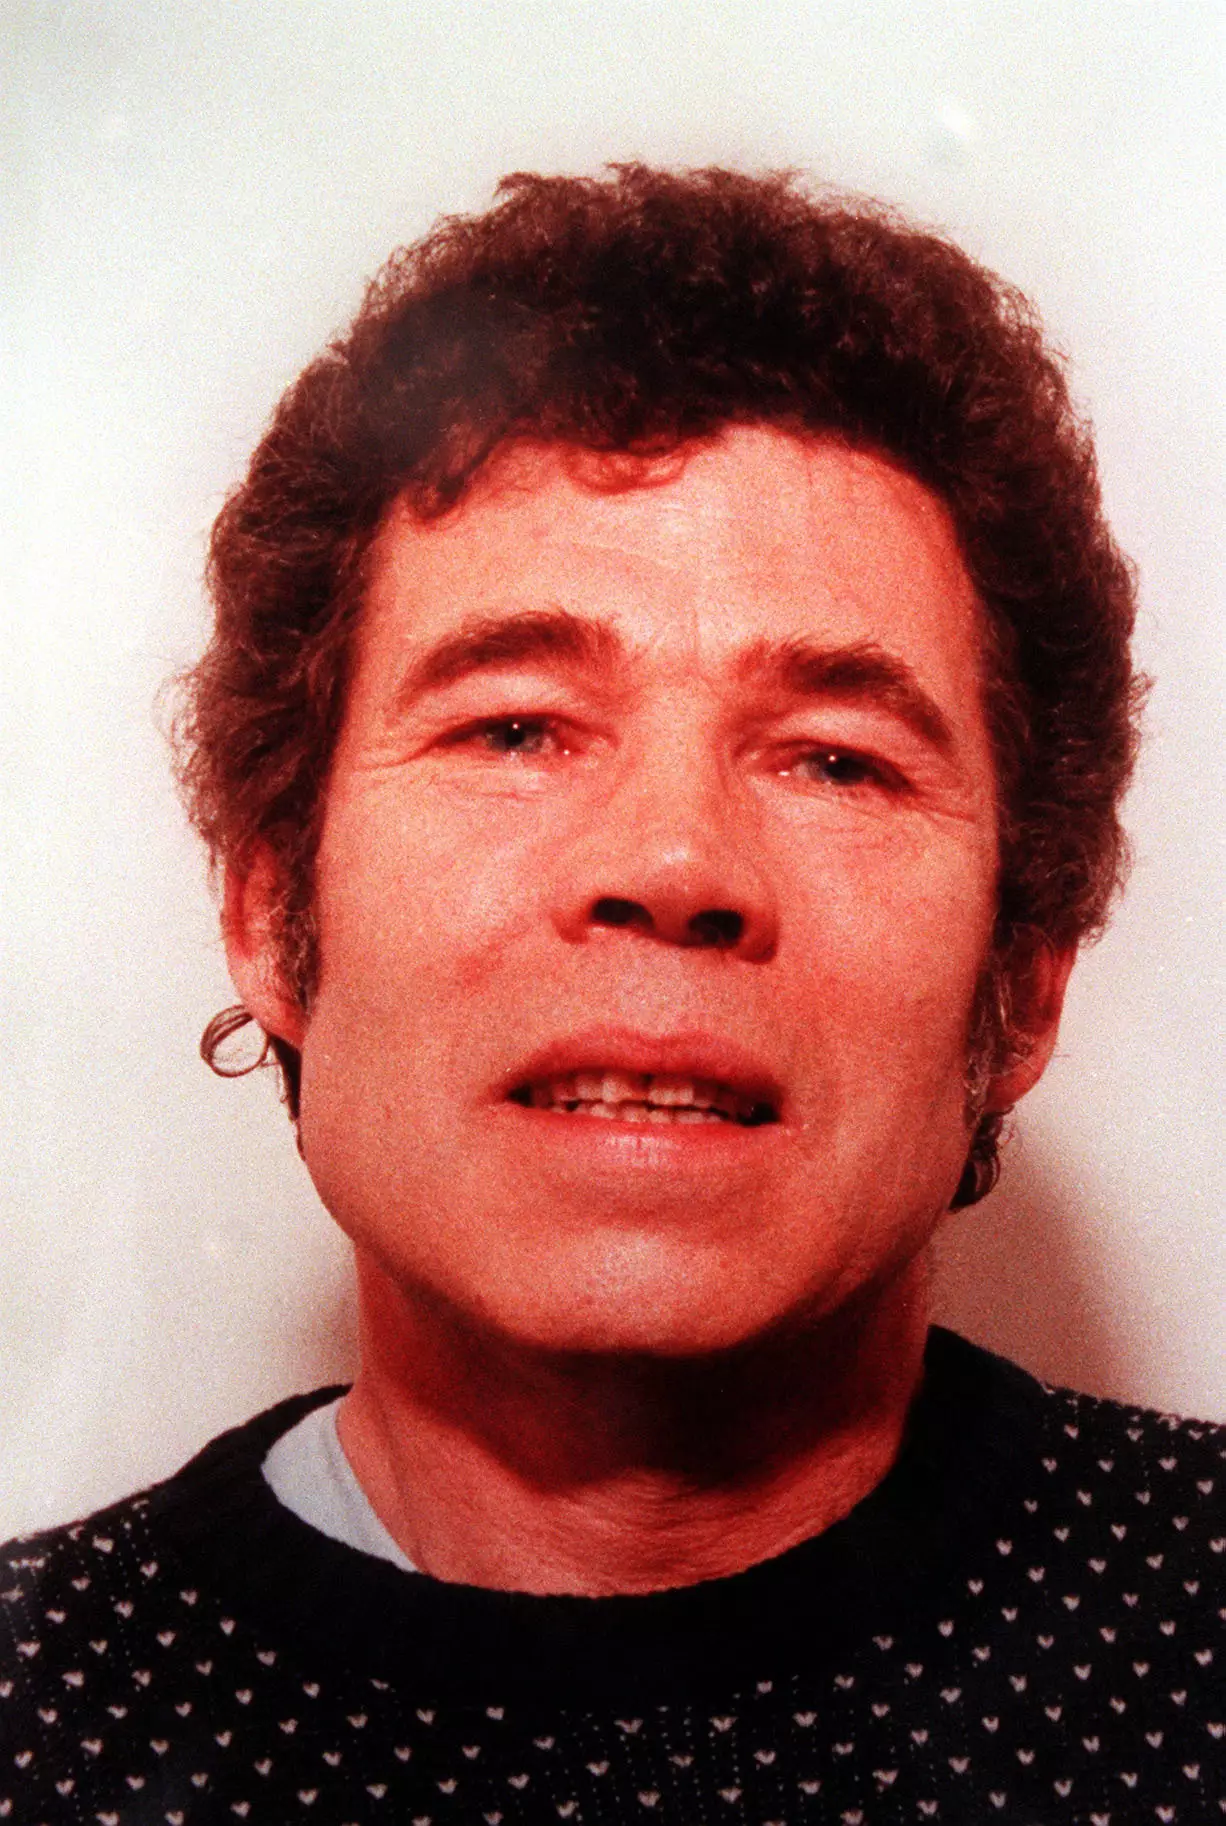 Fred West, one half of the sick husband wife duo who murdered women (